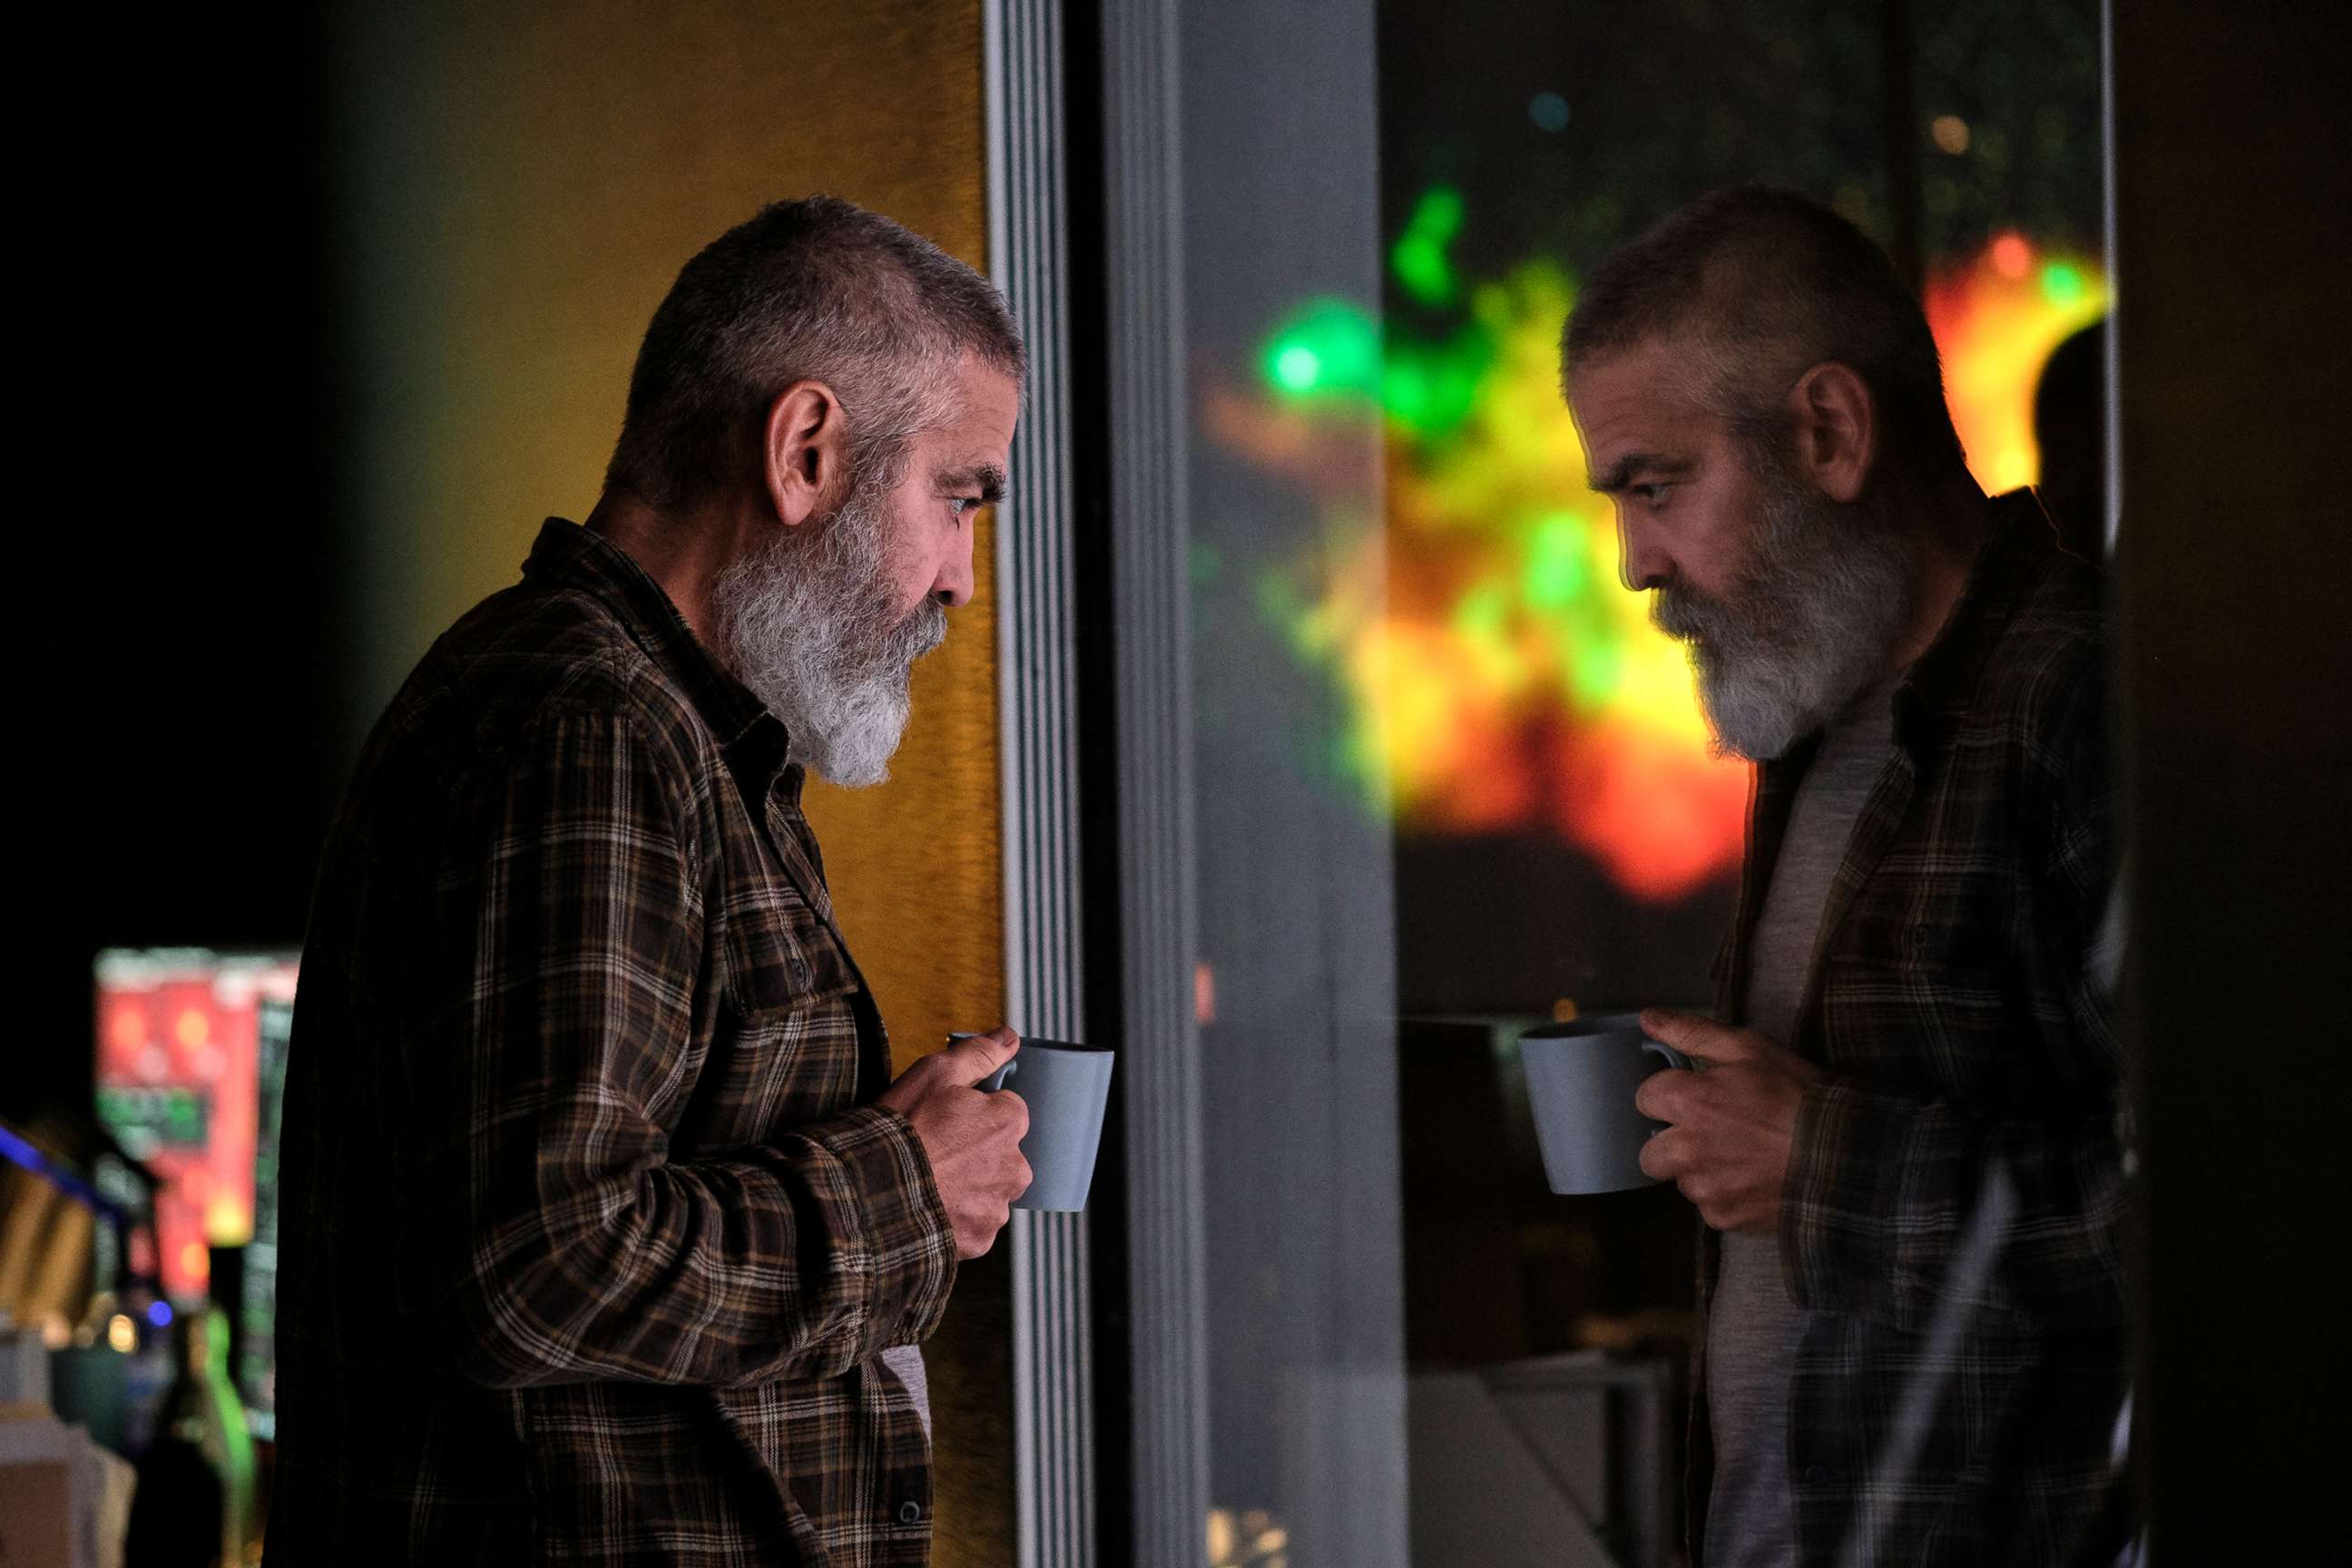 PHOTO: George Clooney in a scene from "The Midnight Sky."